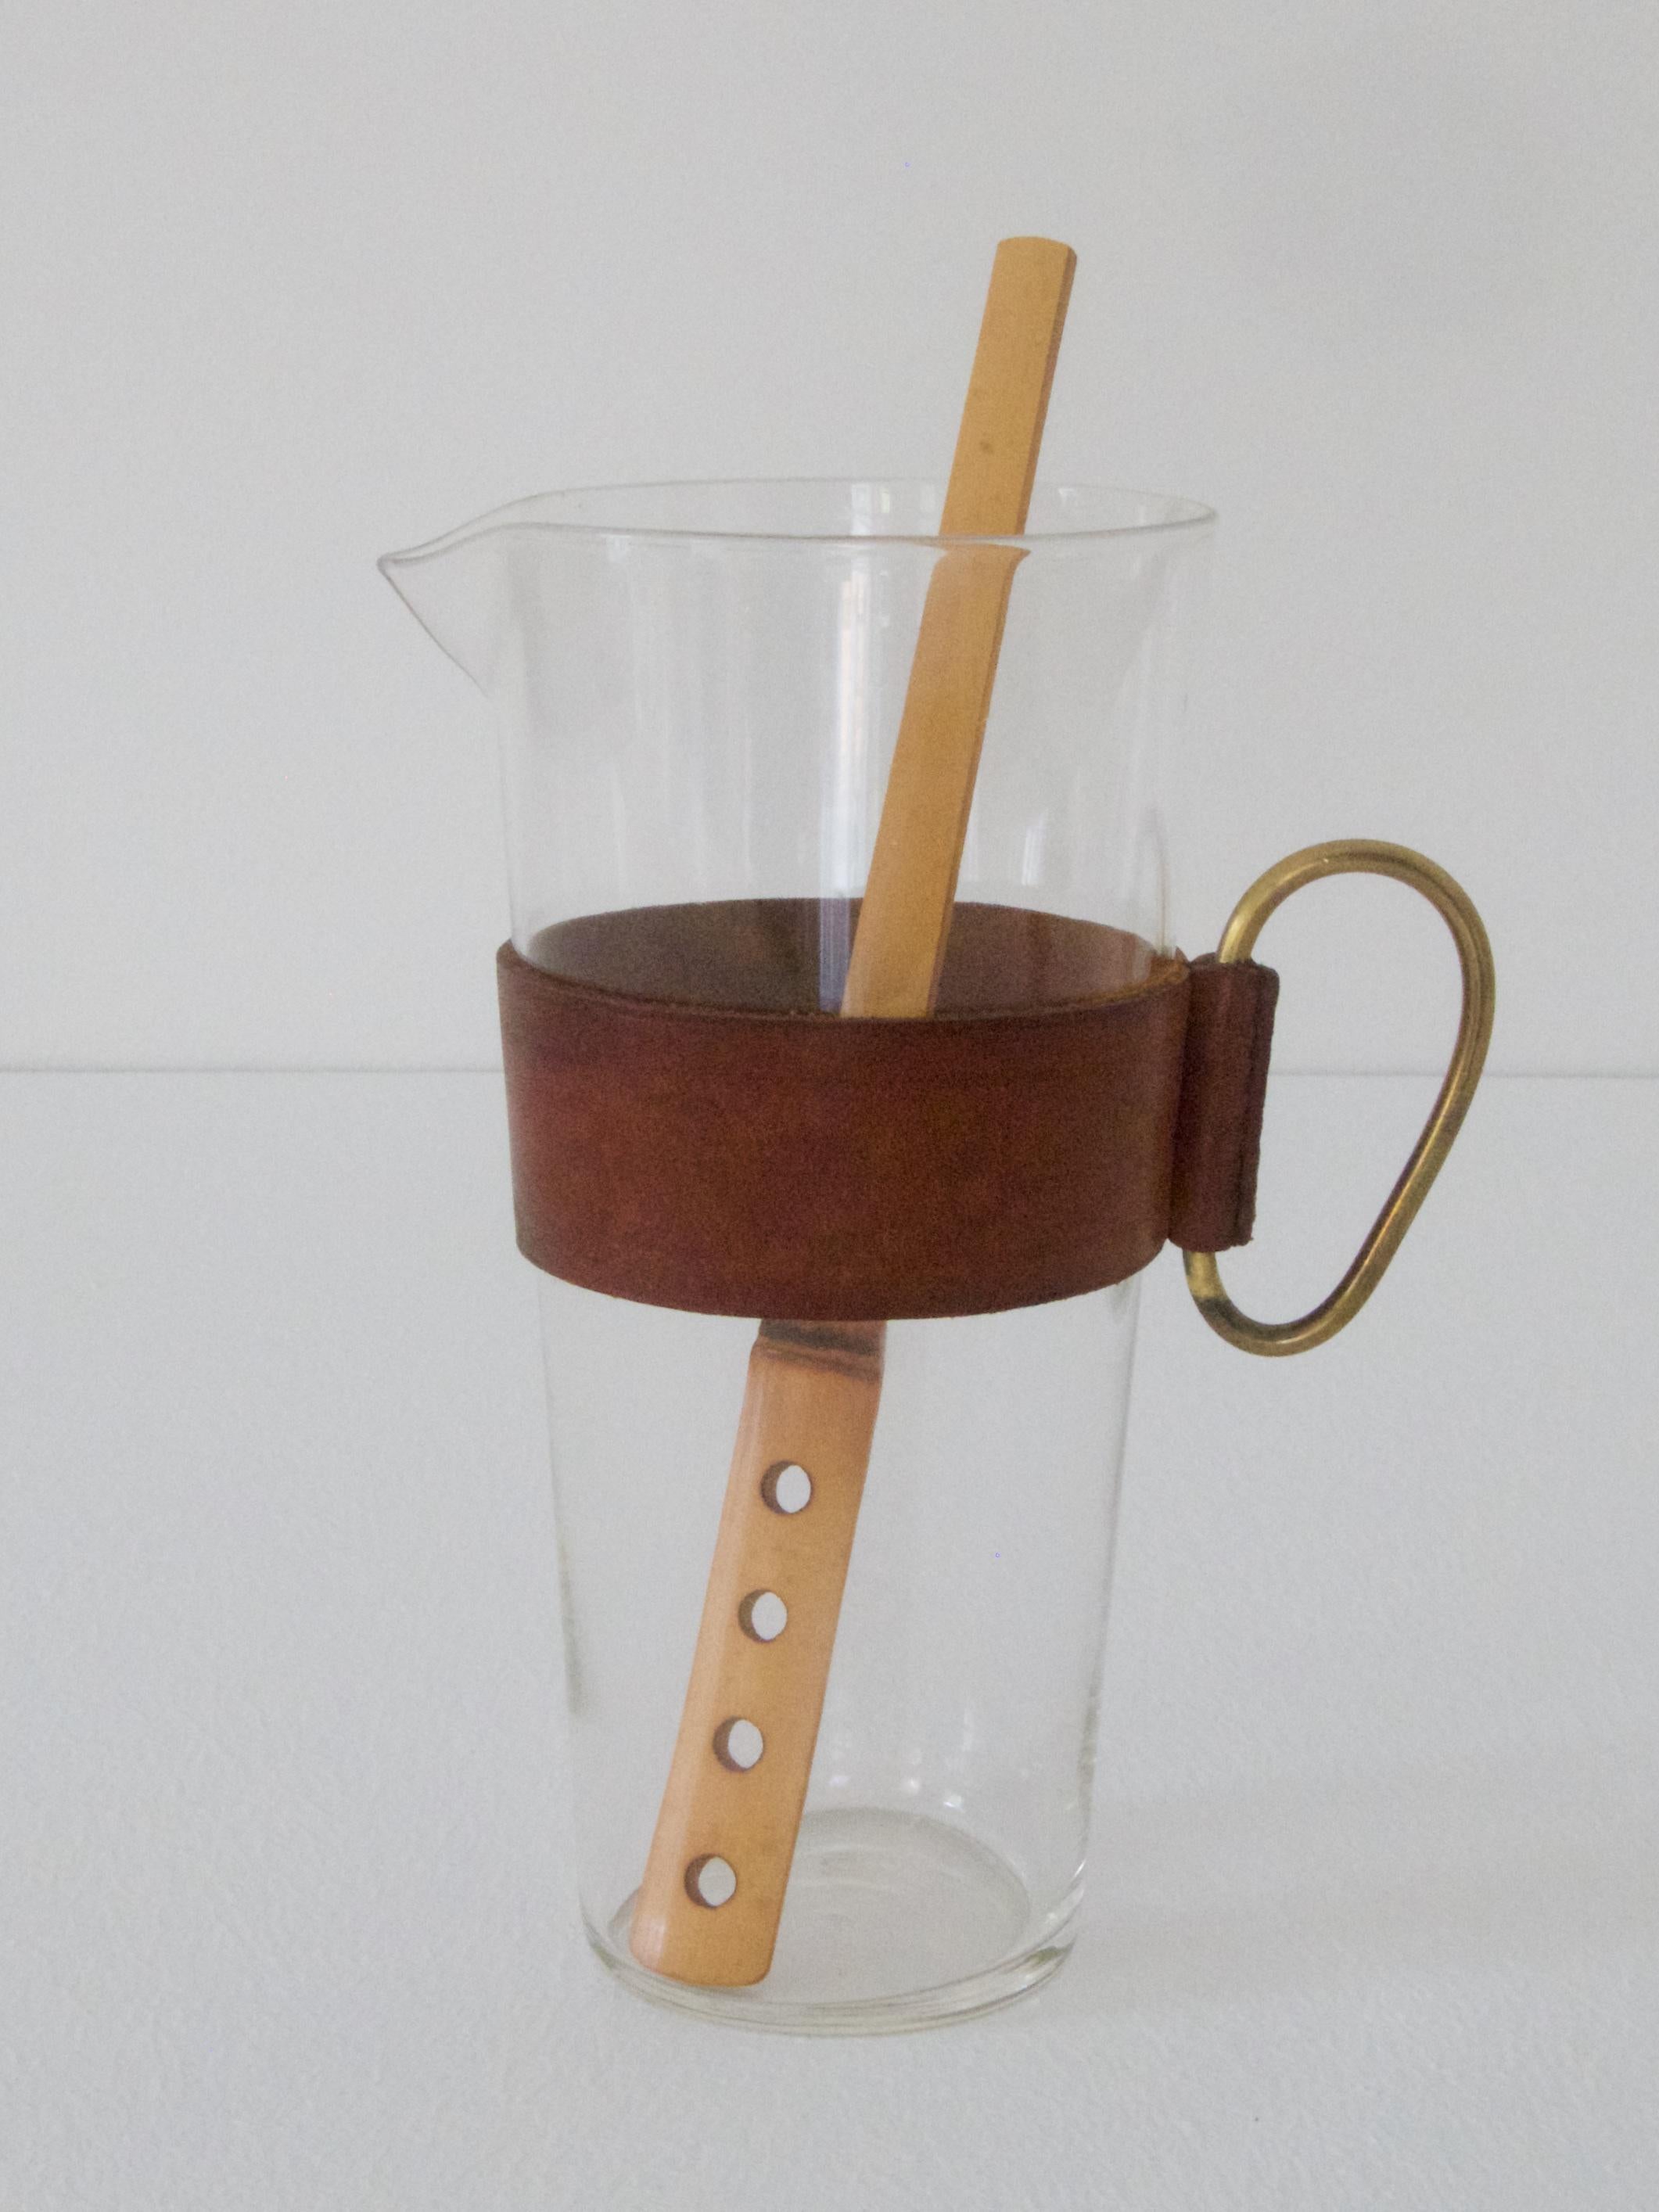 Pitcher with a bamboo muddler No. 3749
by Carl Auböck
hand blown glass, leather sleeves with a brass handle, bamboo muddler

Ø 8,9 cm, H 17,5 cm
muddler 21,3 cm

Good condition - nice patinated leather.
 
Lit.: die kataloge der werkstätte